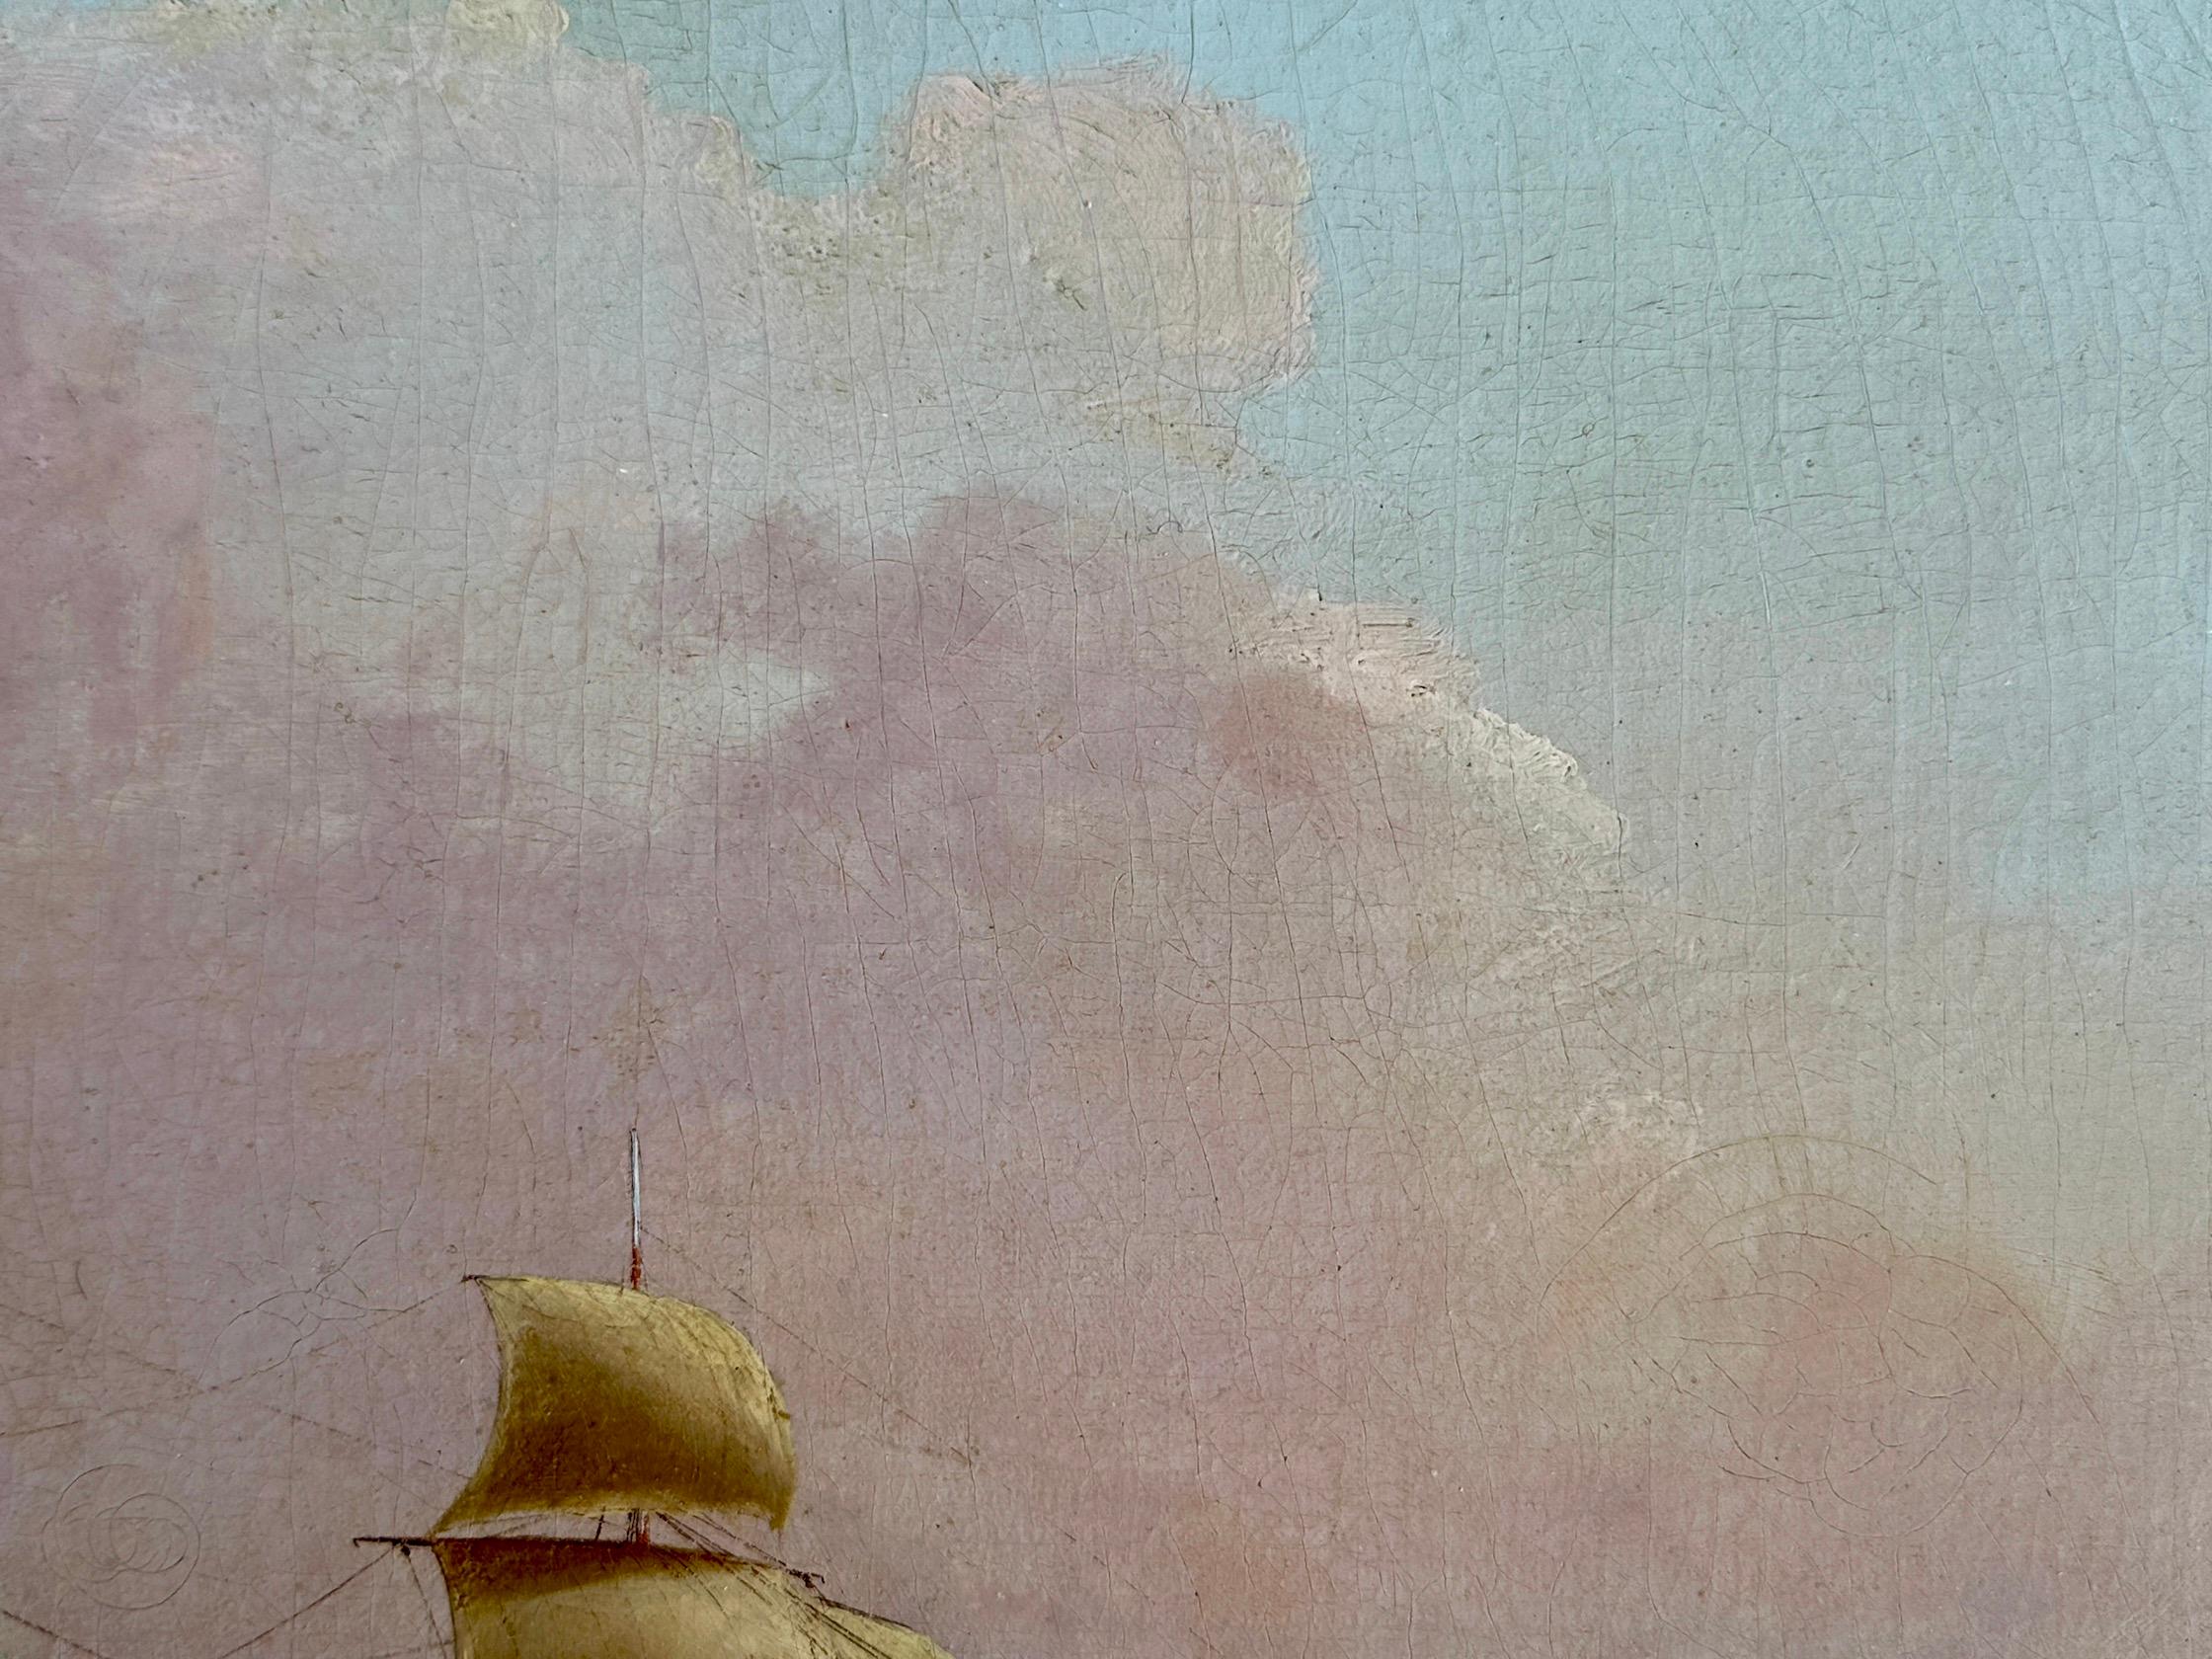 English 19th century portrait of the Clipper ship Crescent at sea in full sail For Sale 9